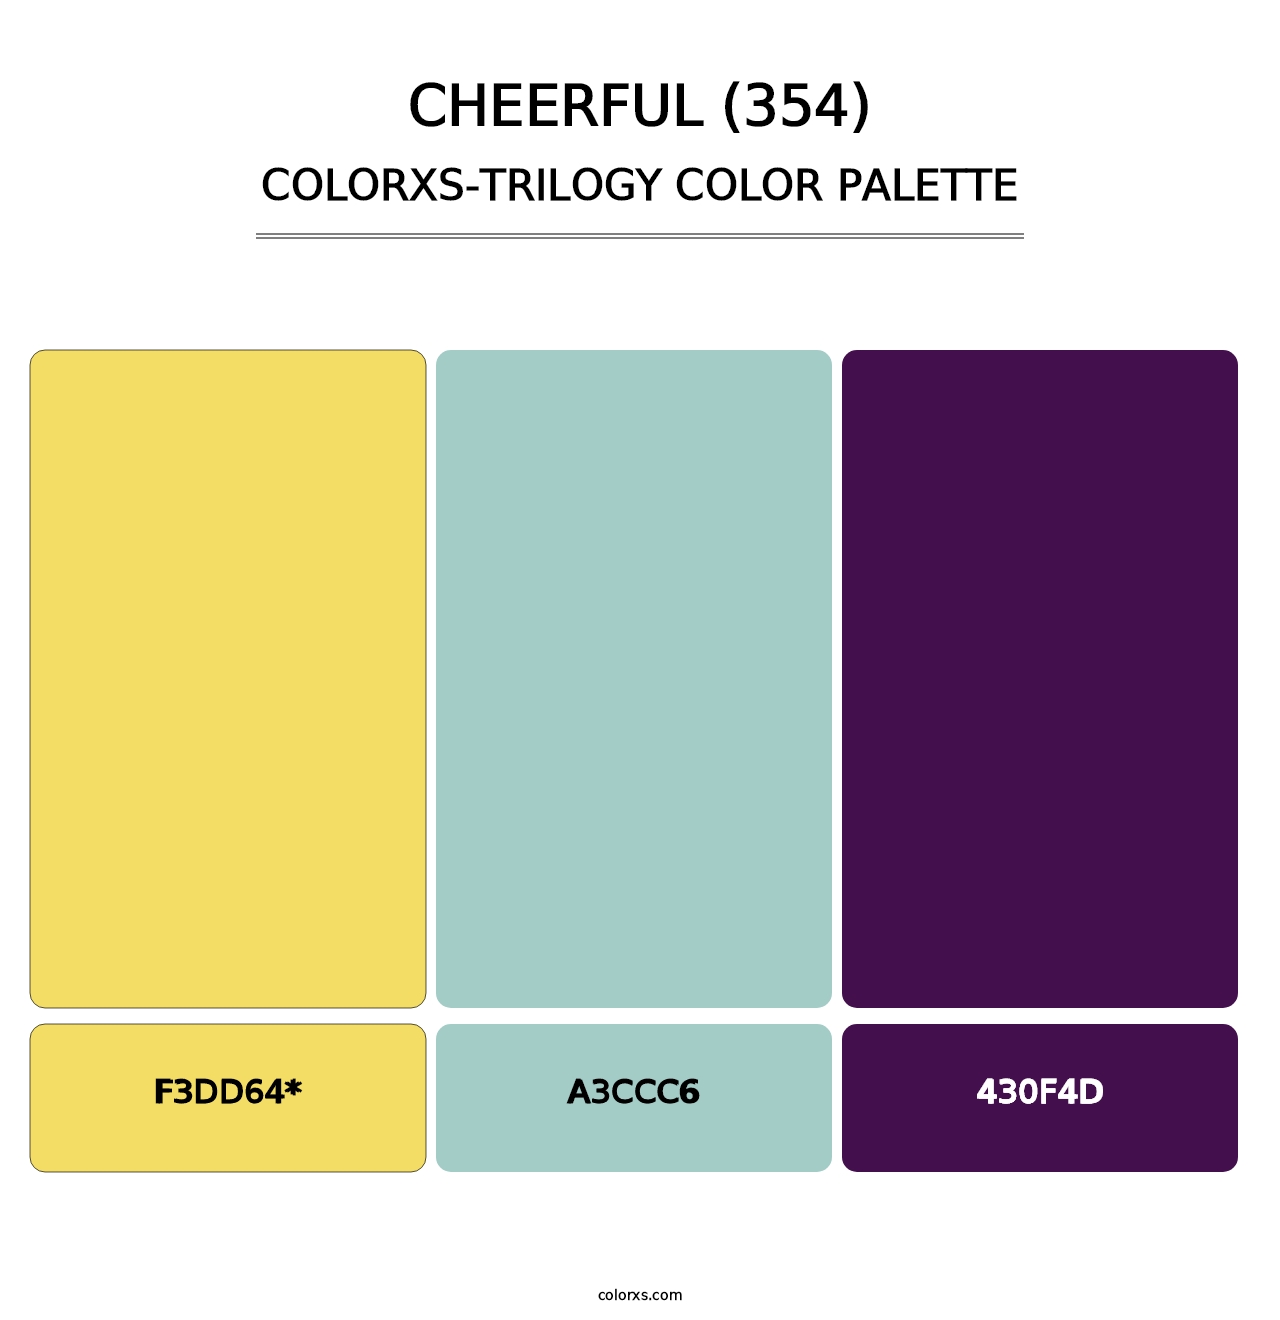 Cheerful (354) - Colorxs Trilogy Palette